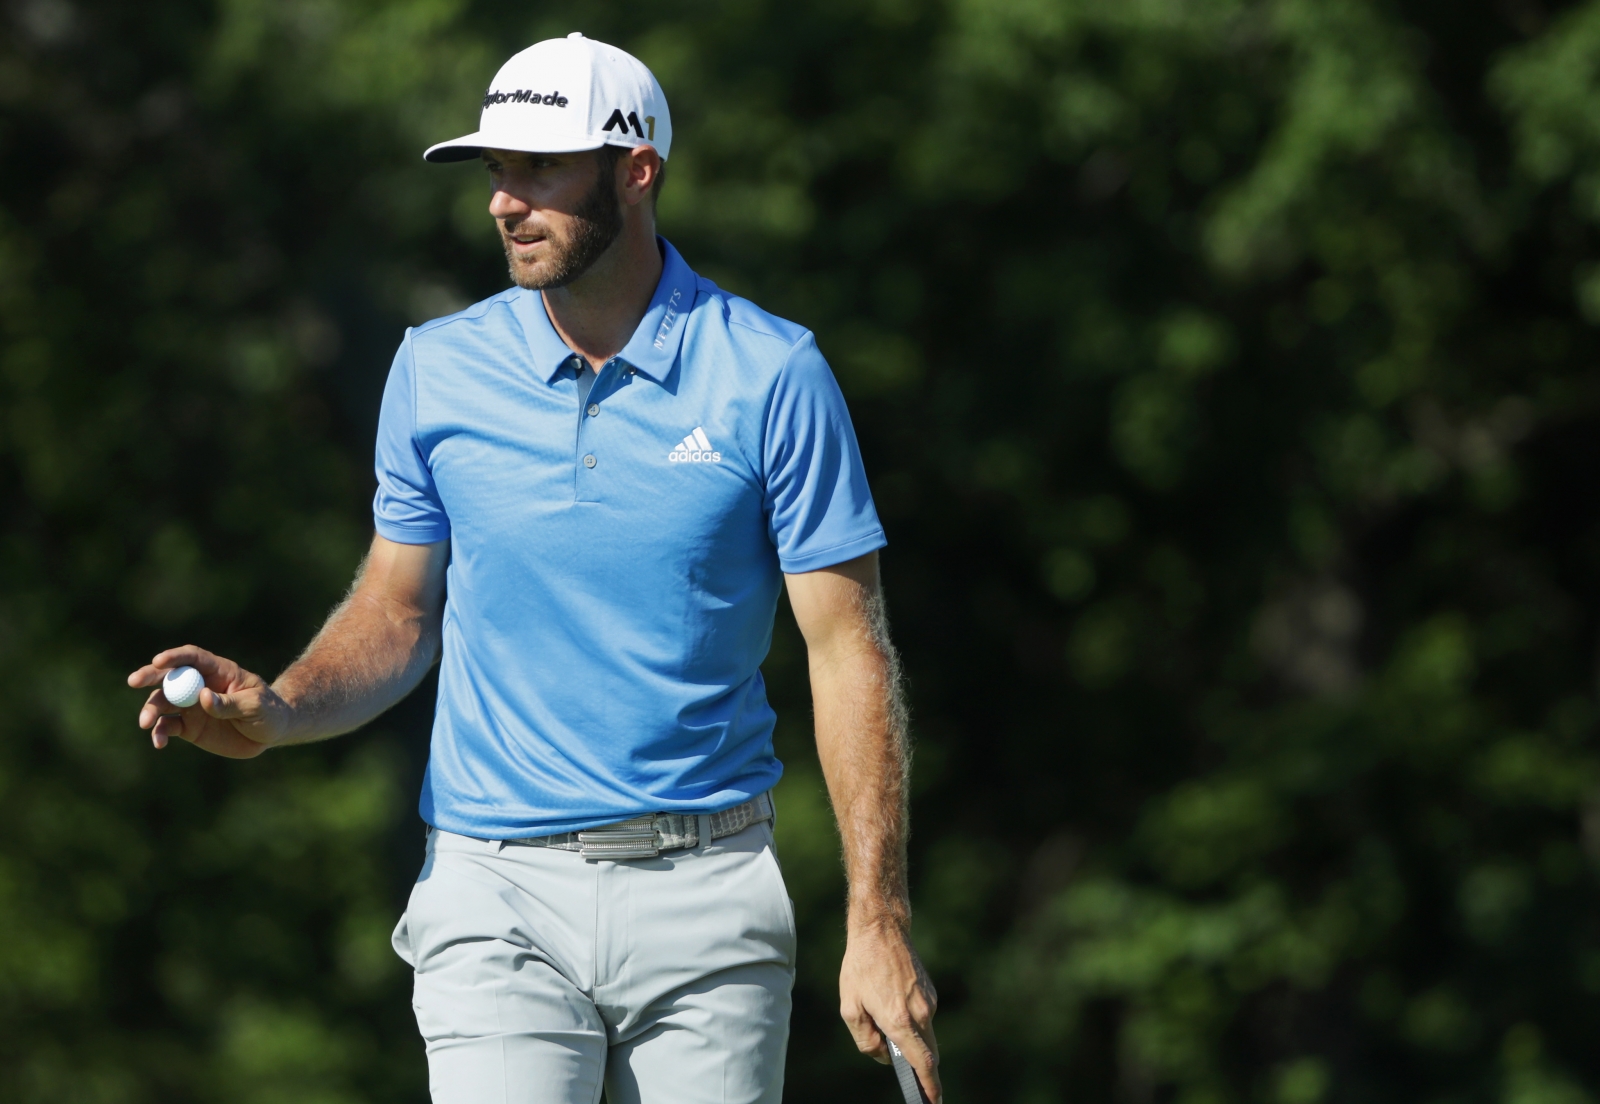 Dustin Johnson leads a delayed US Open after complete two rounds in one day...